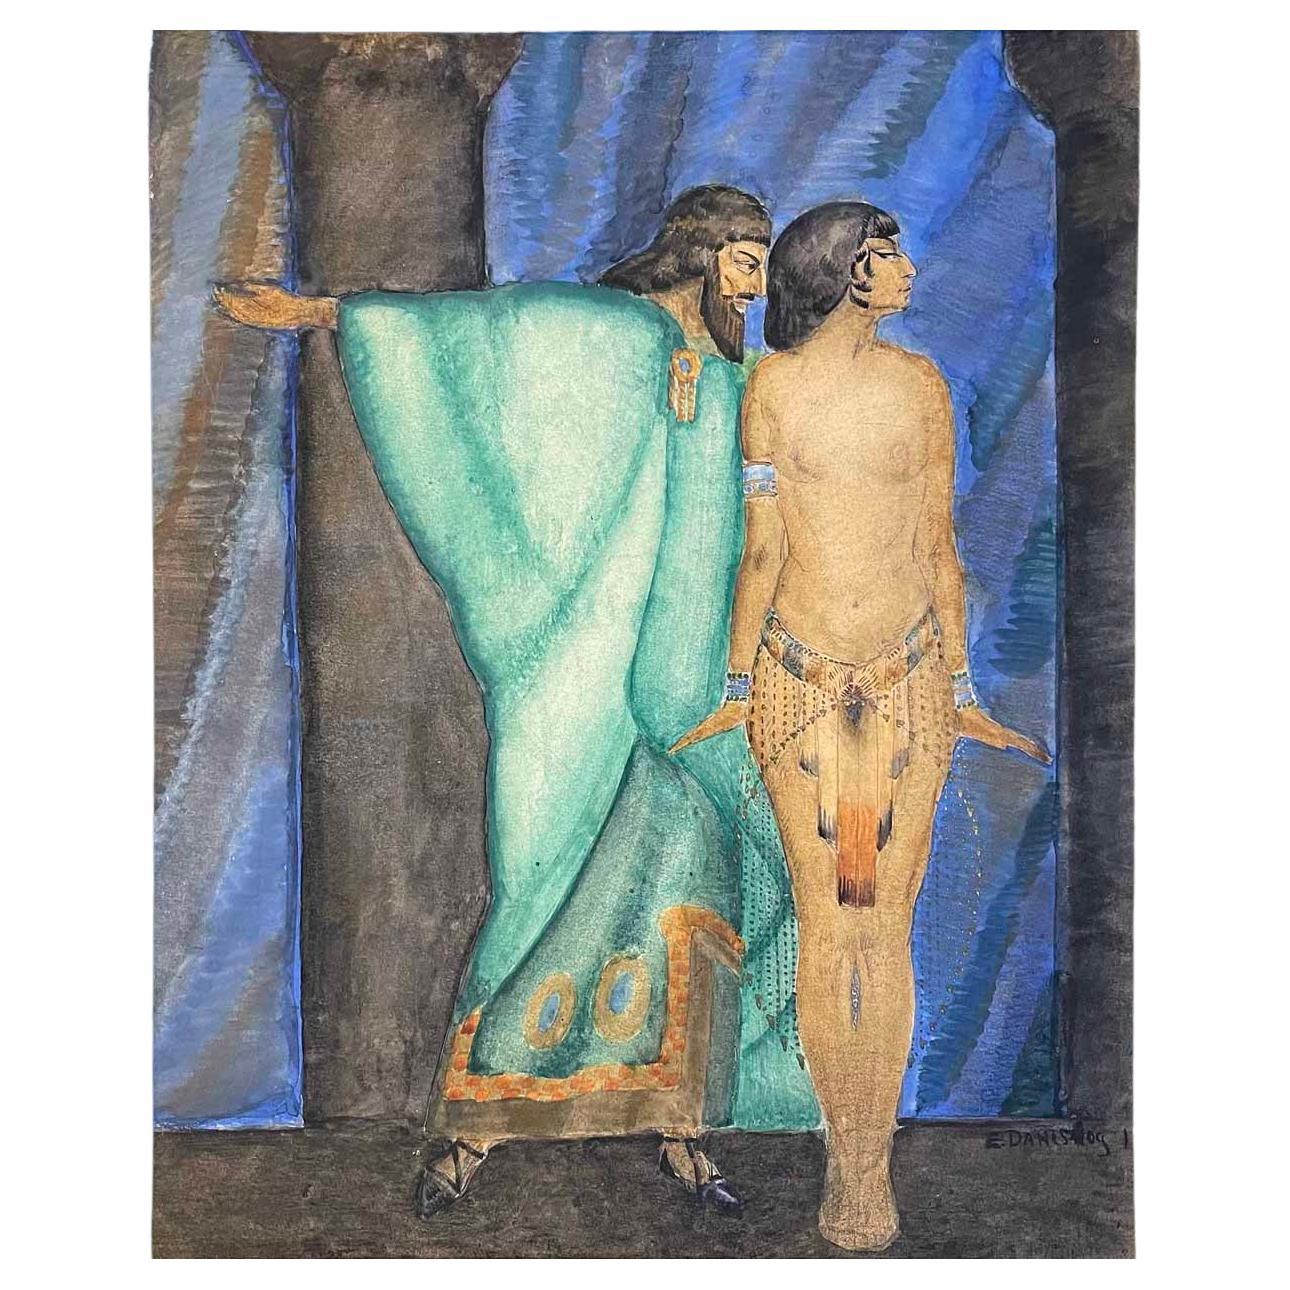 "Herod and Salome", Sensuous Art Nouveau/Art Deco Painting in Blue and Green